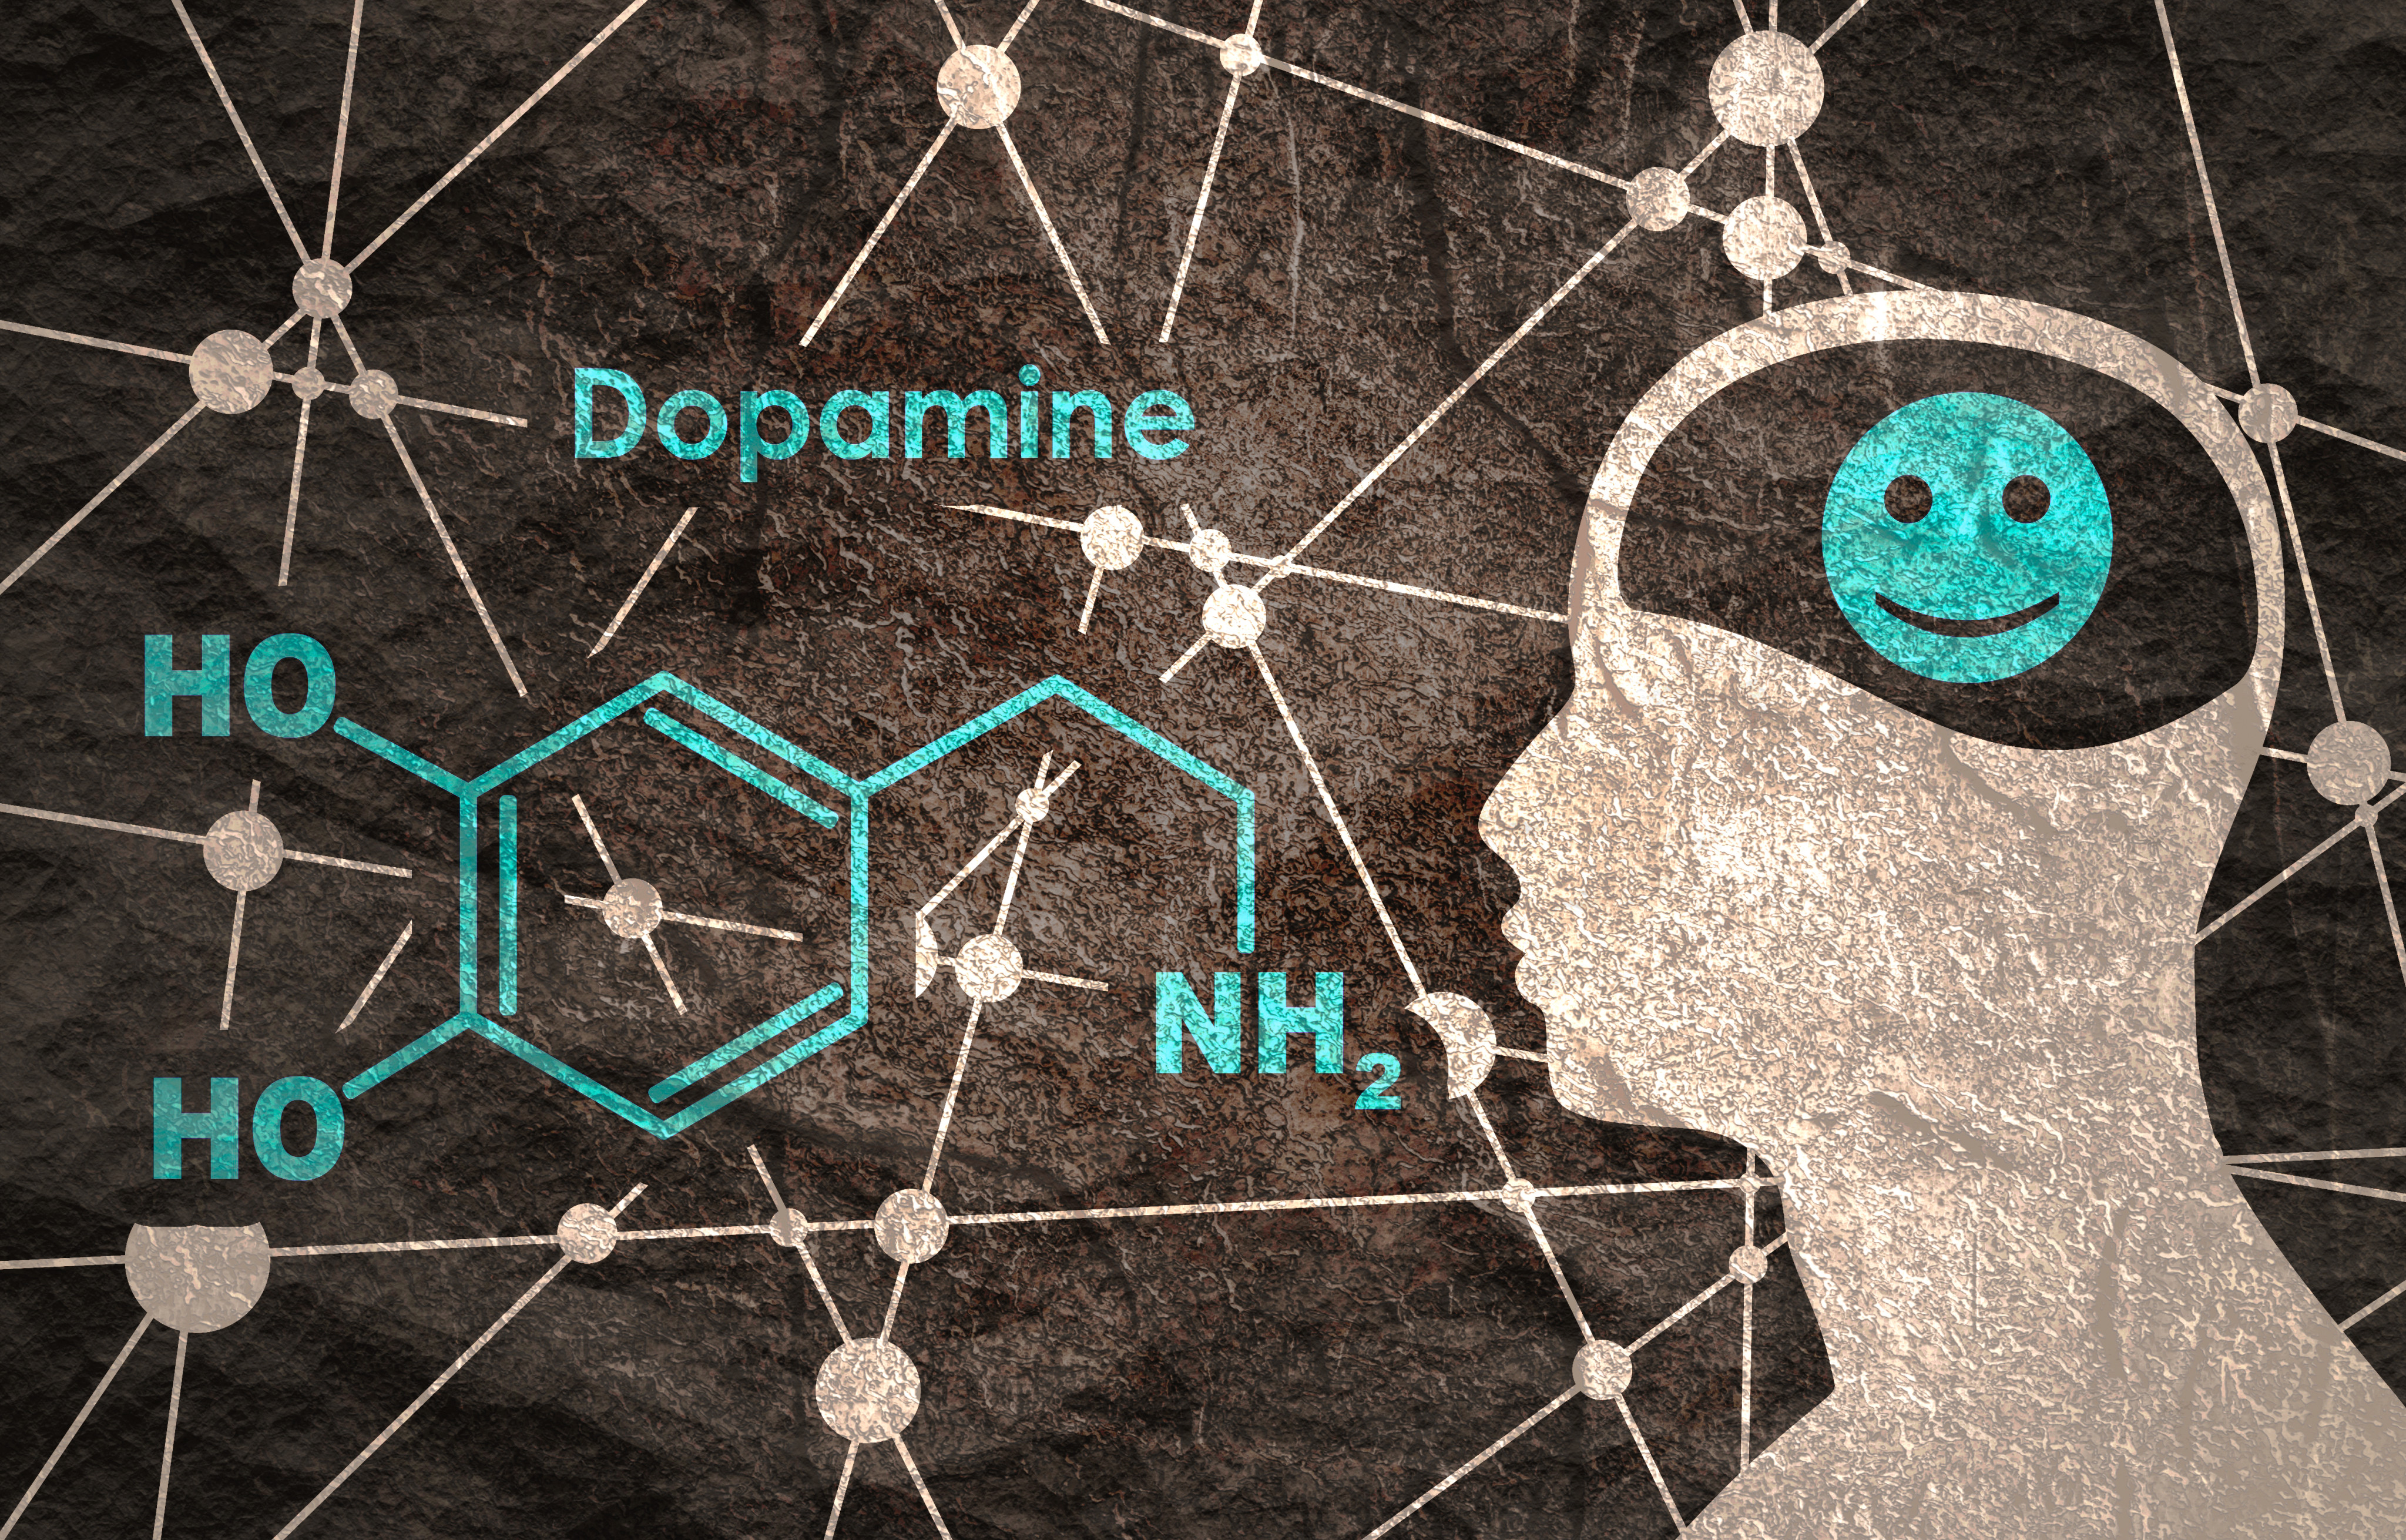 There are many ways to produce dopamine, often called the ‘happy hormone’. Photo: Shutterstock